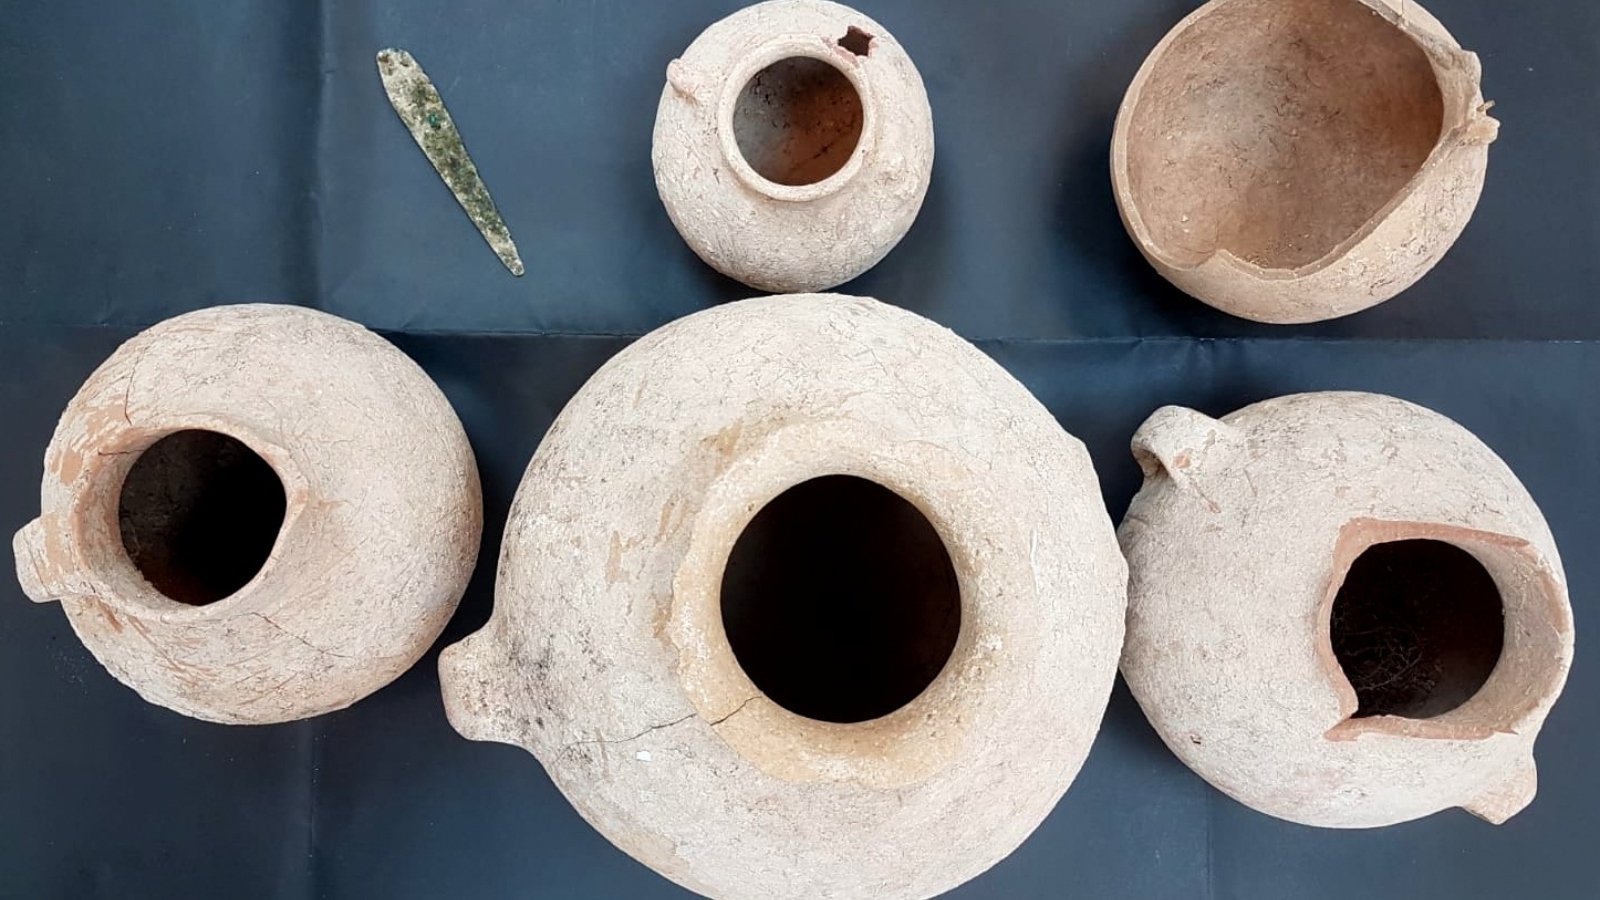 The 4,500-year old findings turned in by a citizen. Photo courtesy of Israel Antiquities Authority